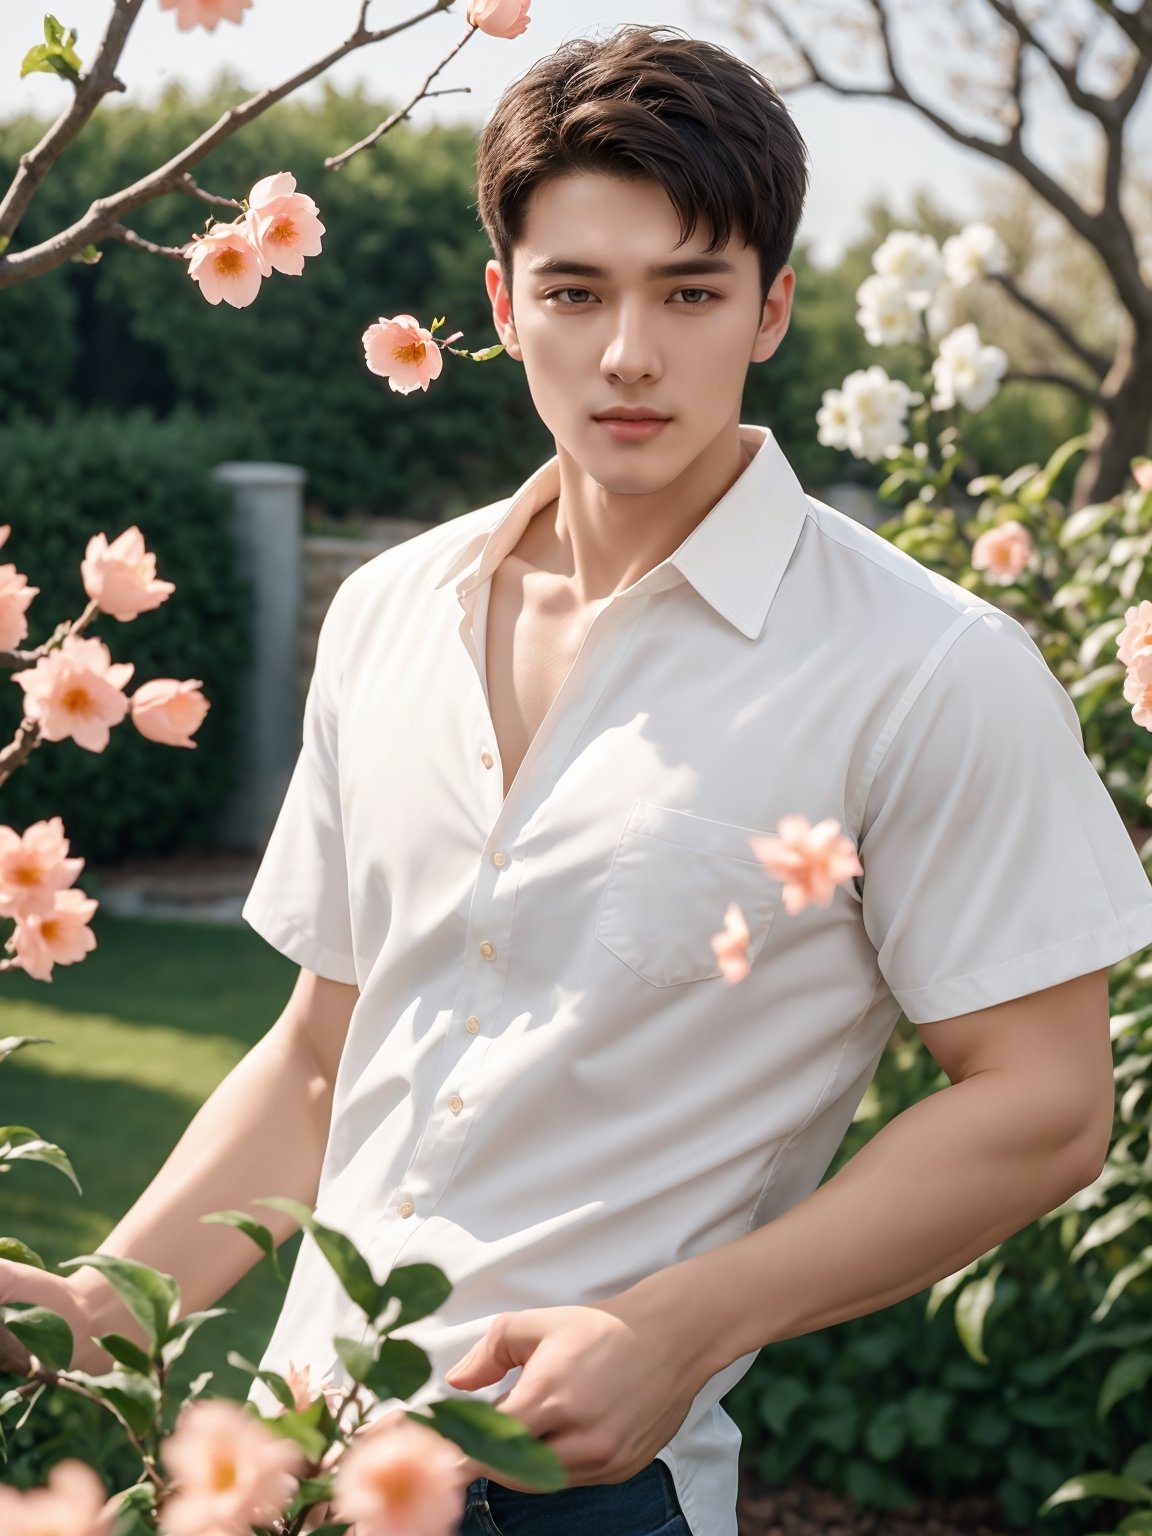 masterpiece, 1 Man, Handsome, Look at me, Brown eyes, Short hair, Oil head, White shirt, 22 years old, Outdoor, Garden, Peach tree, Flying petals, textured skin, super detail, best quality